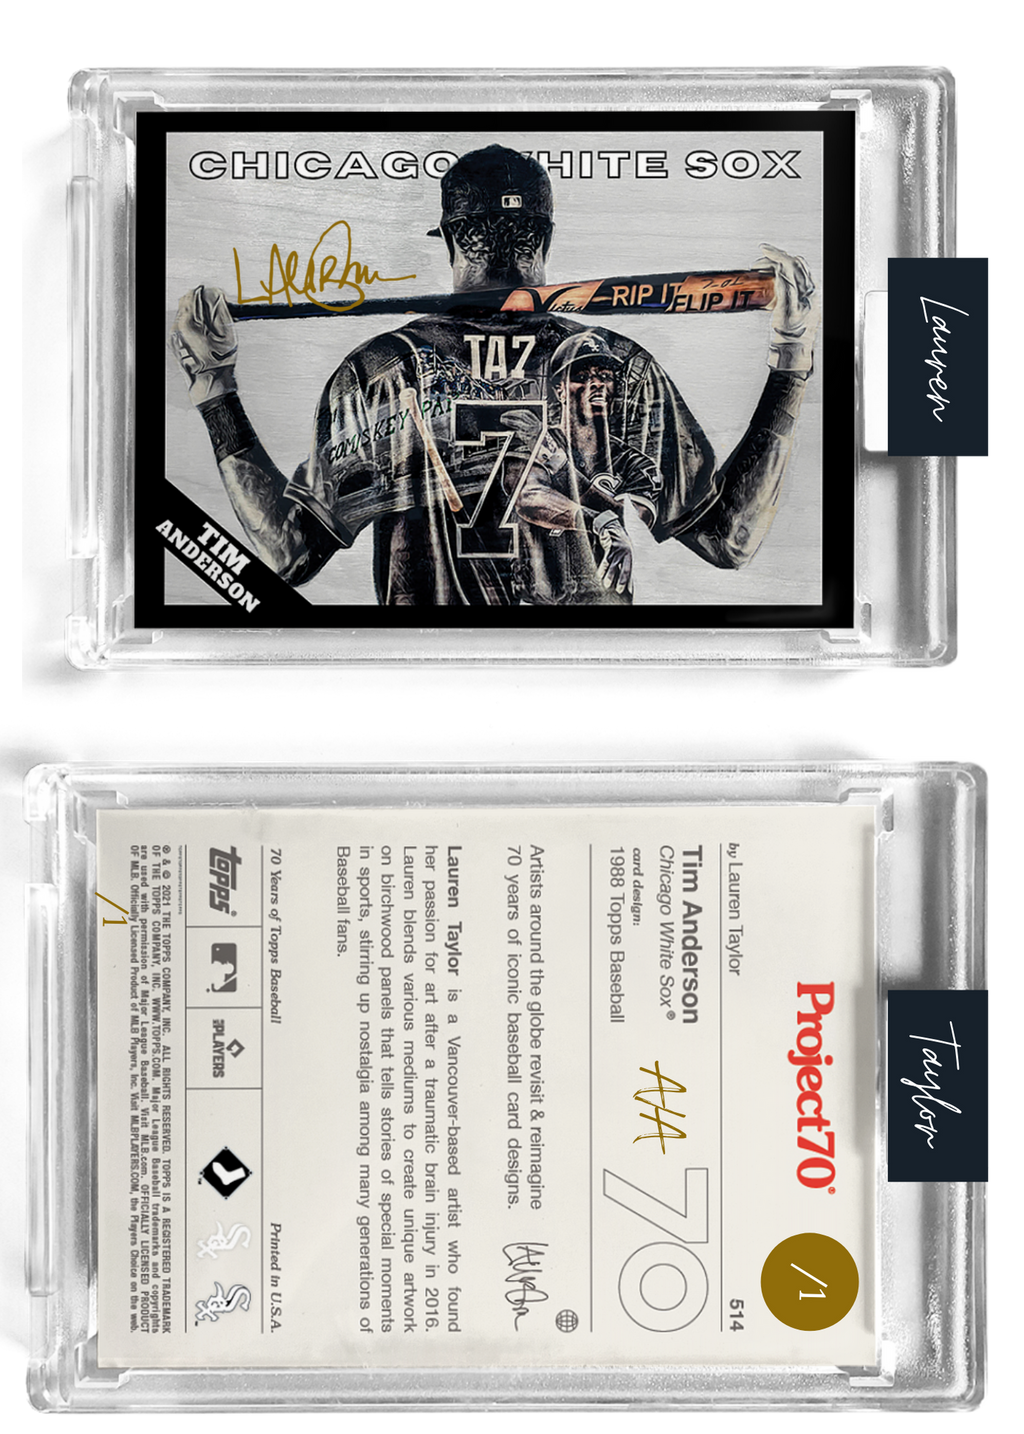 /1 Gold Metallic Artist Signature - Topps Project 70 130pt card #514 by Lauren Taylor - Tim Anderson